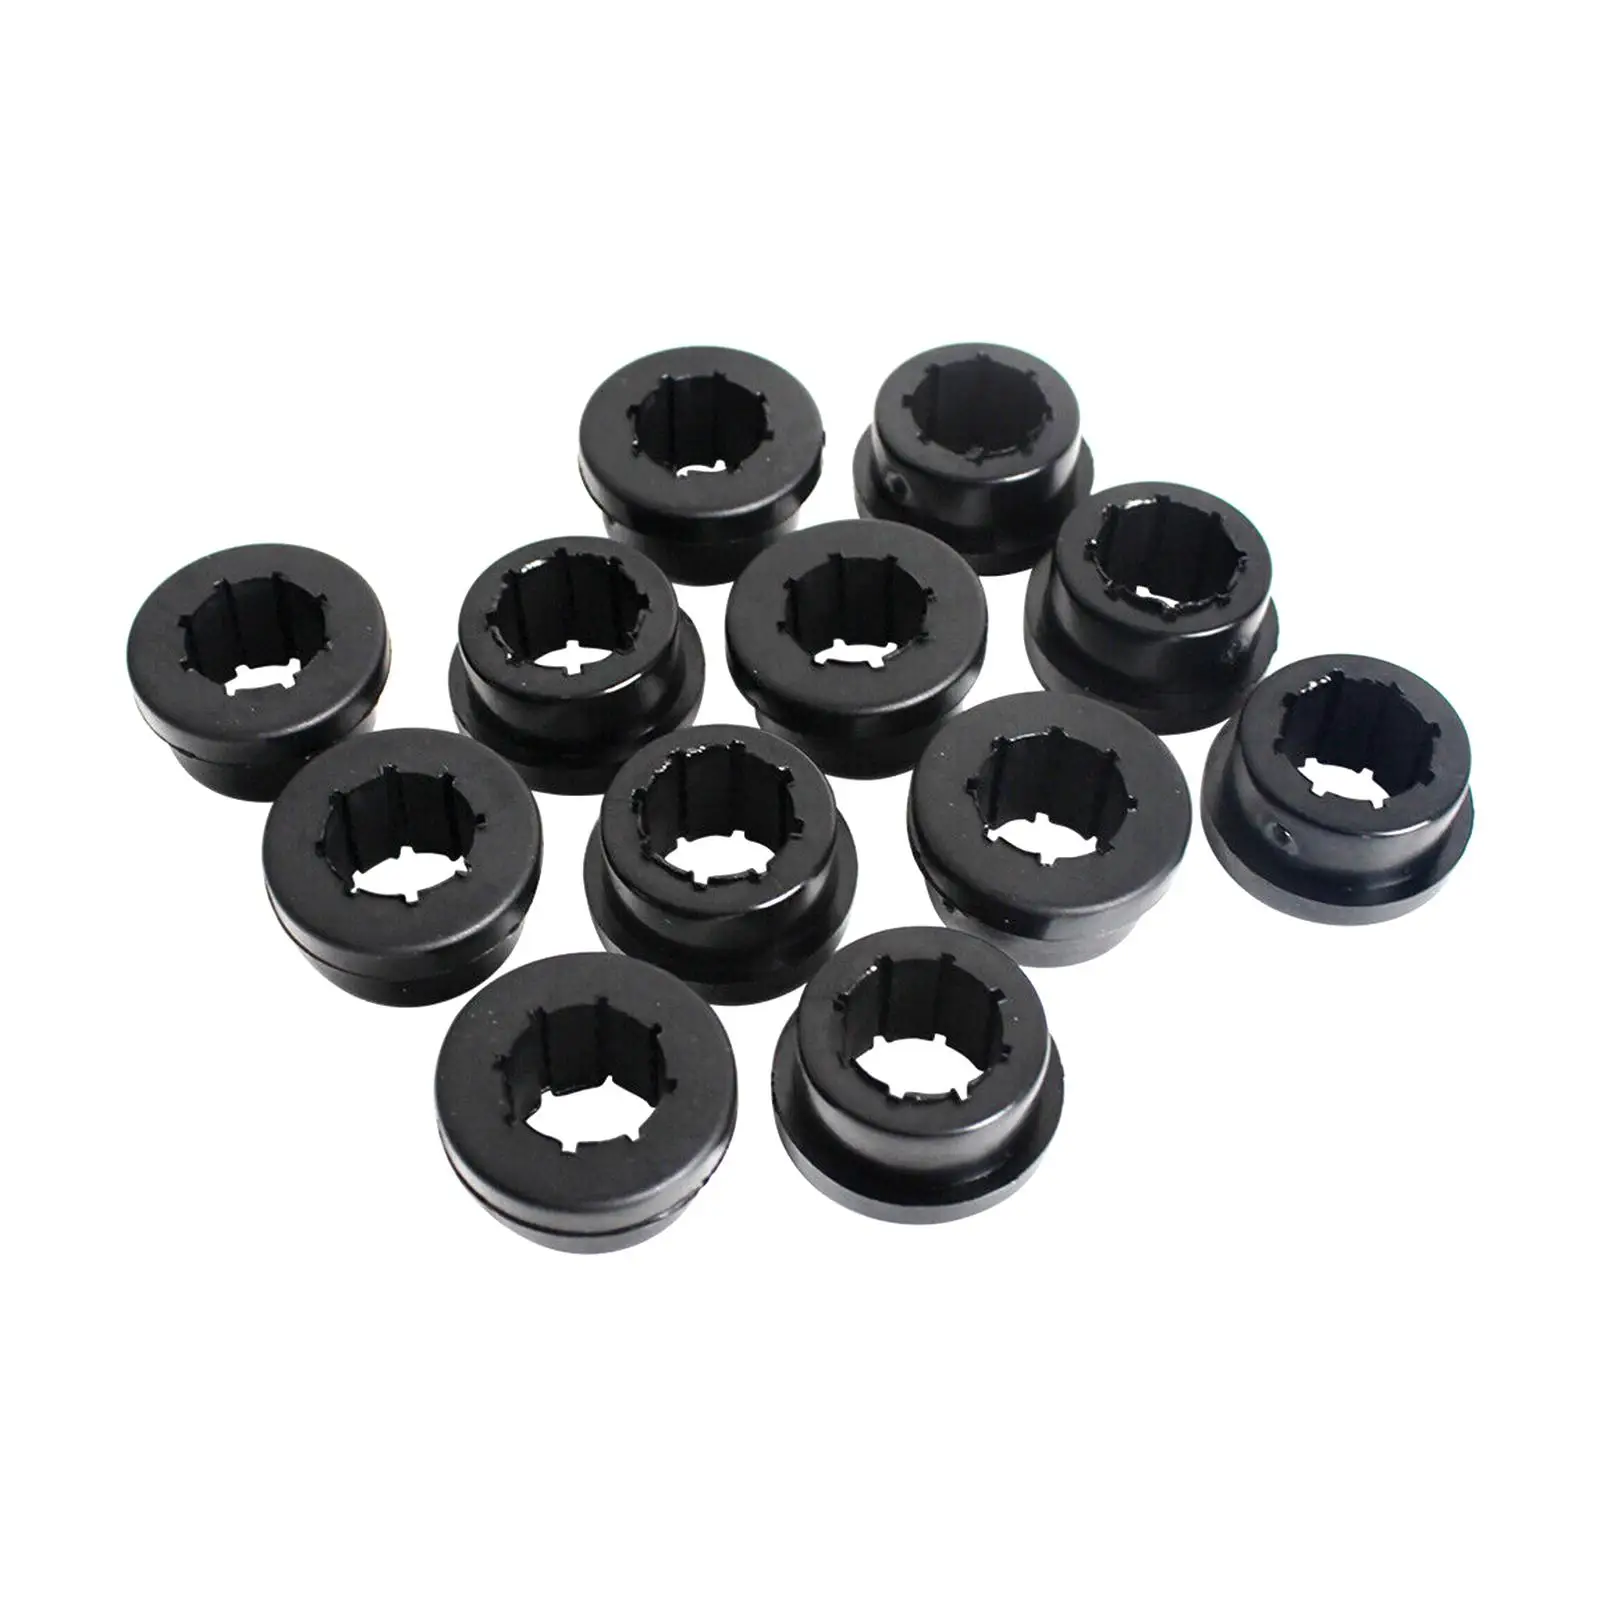 12 Pieces Lower Control Arm Rear Camber Bushings High Performance Directly Replace for Eg EK Dc Accessory